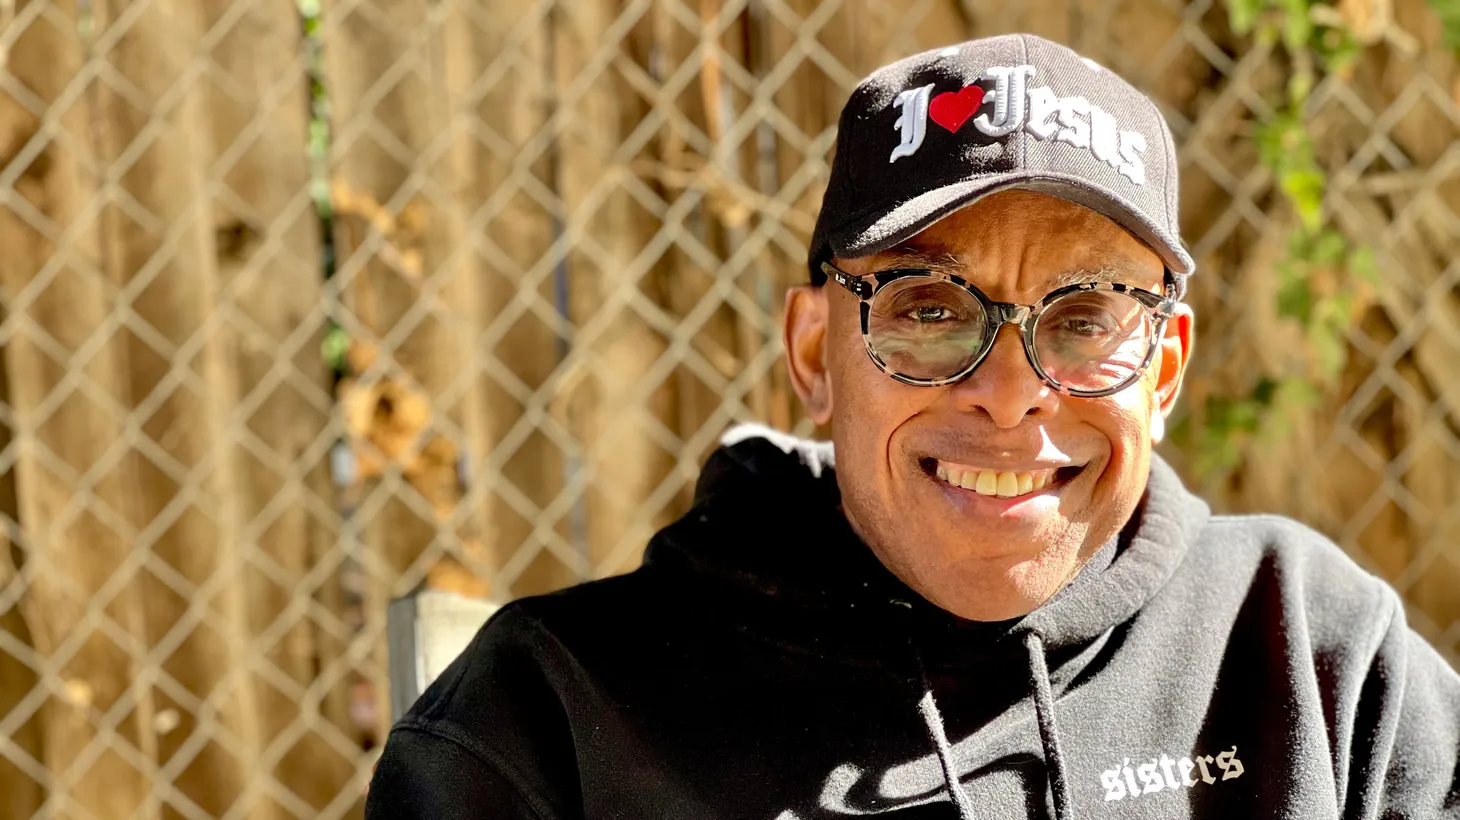 After facing strokes, cancer, mental health issues and homelessness, Frederick “Juice” Johnson says volunteering with nonprofits is what keeps him going now.